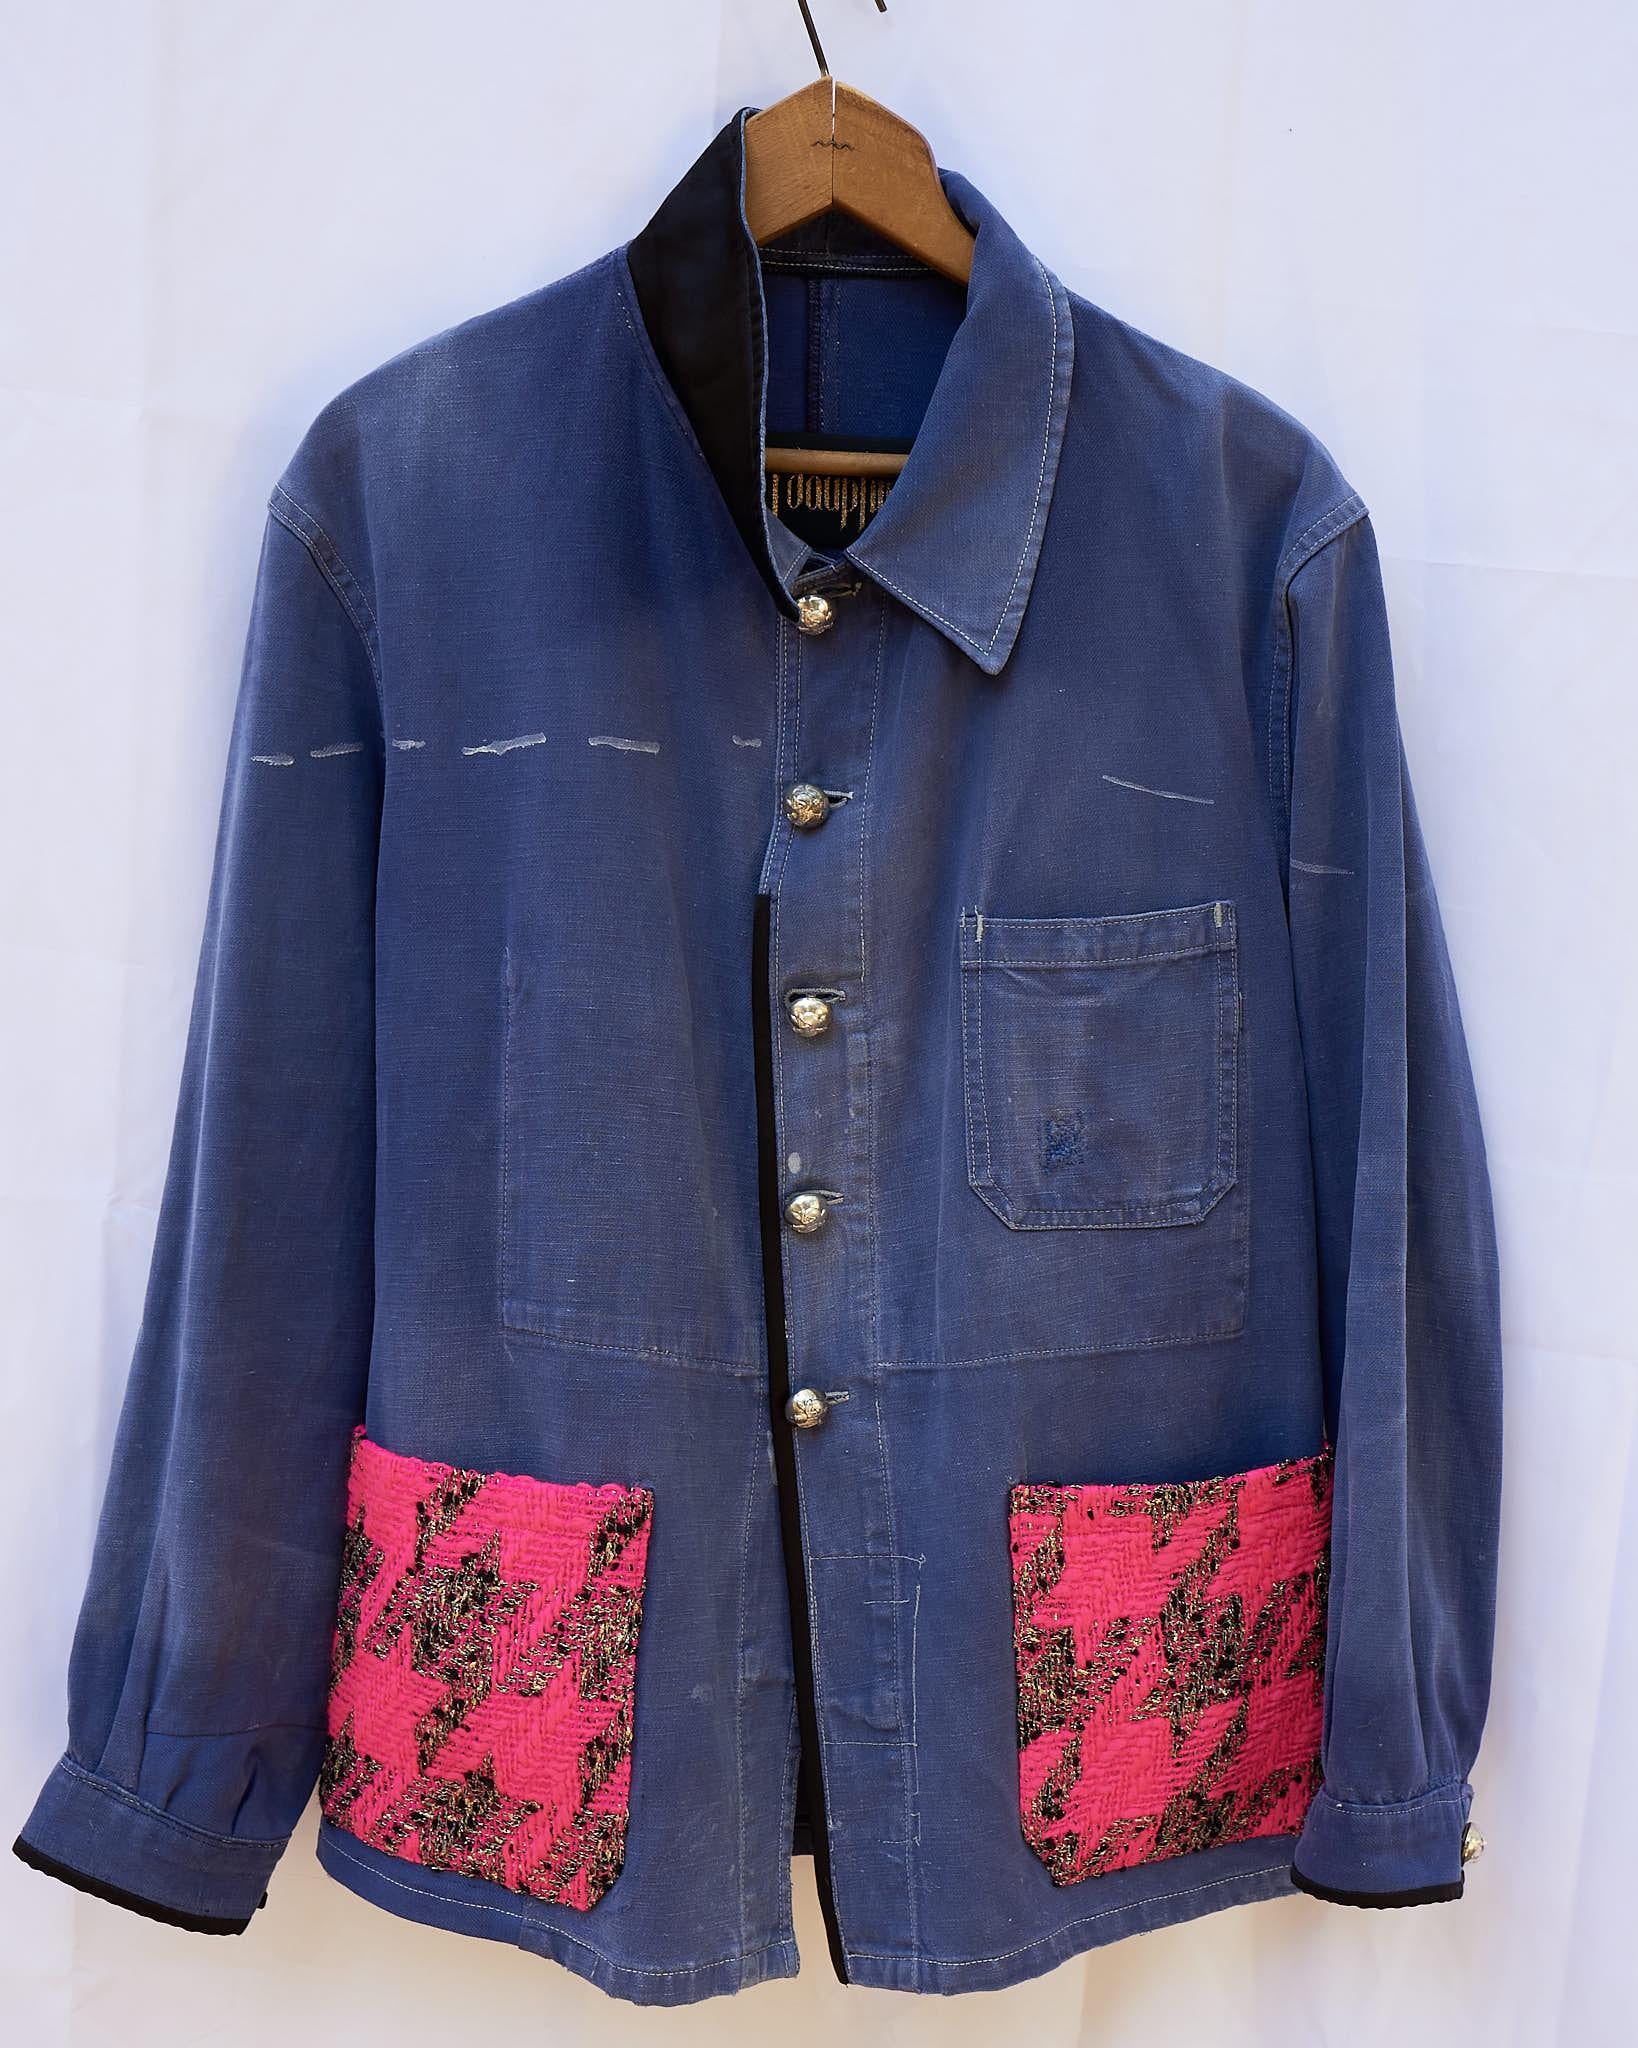 Jacket Cotton Blue Designer Neon Pink Tweed Distressed French Work Wear In New Condition For Sale In Los Angeles, CA